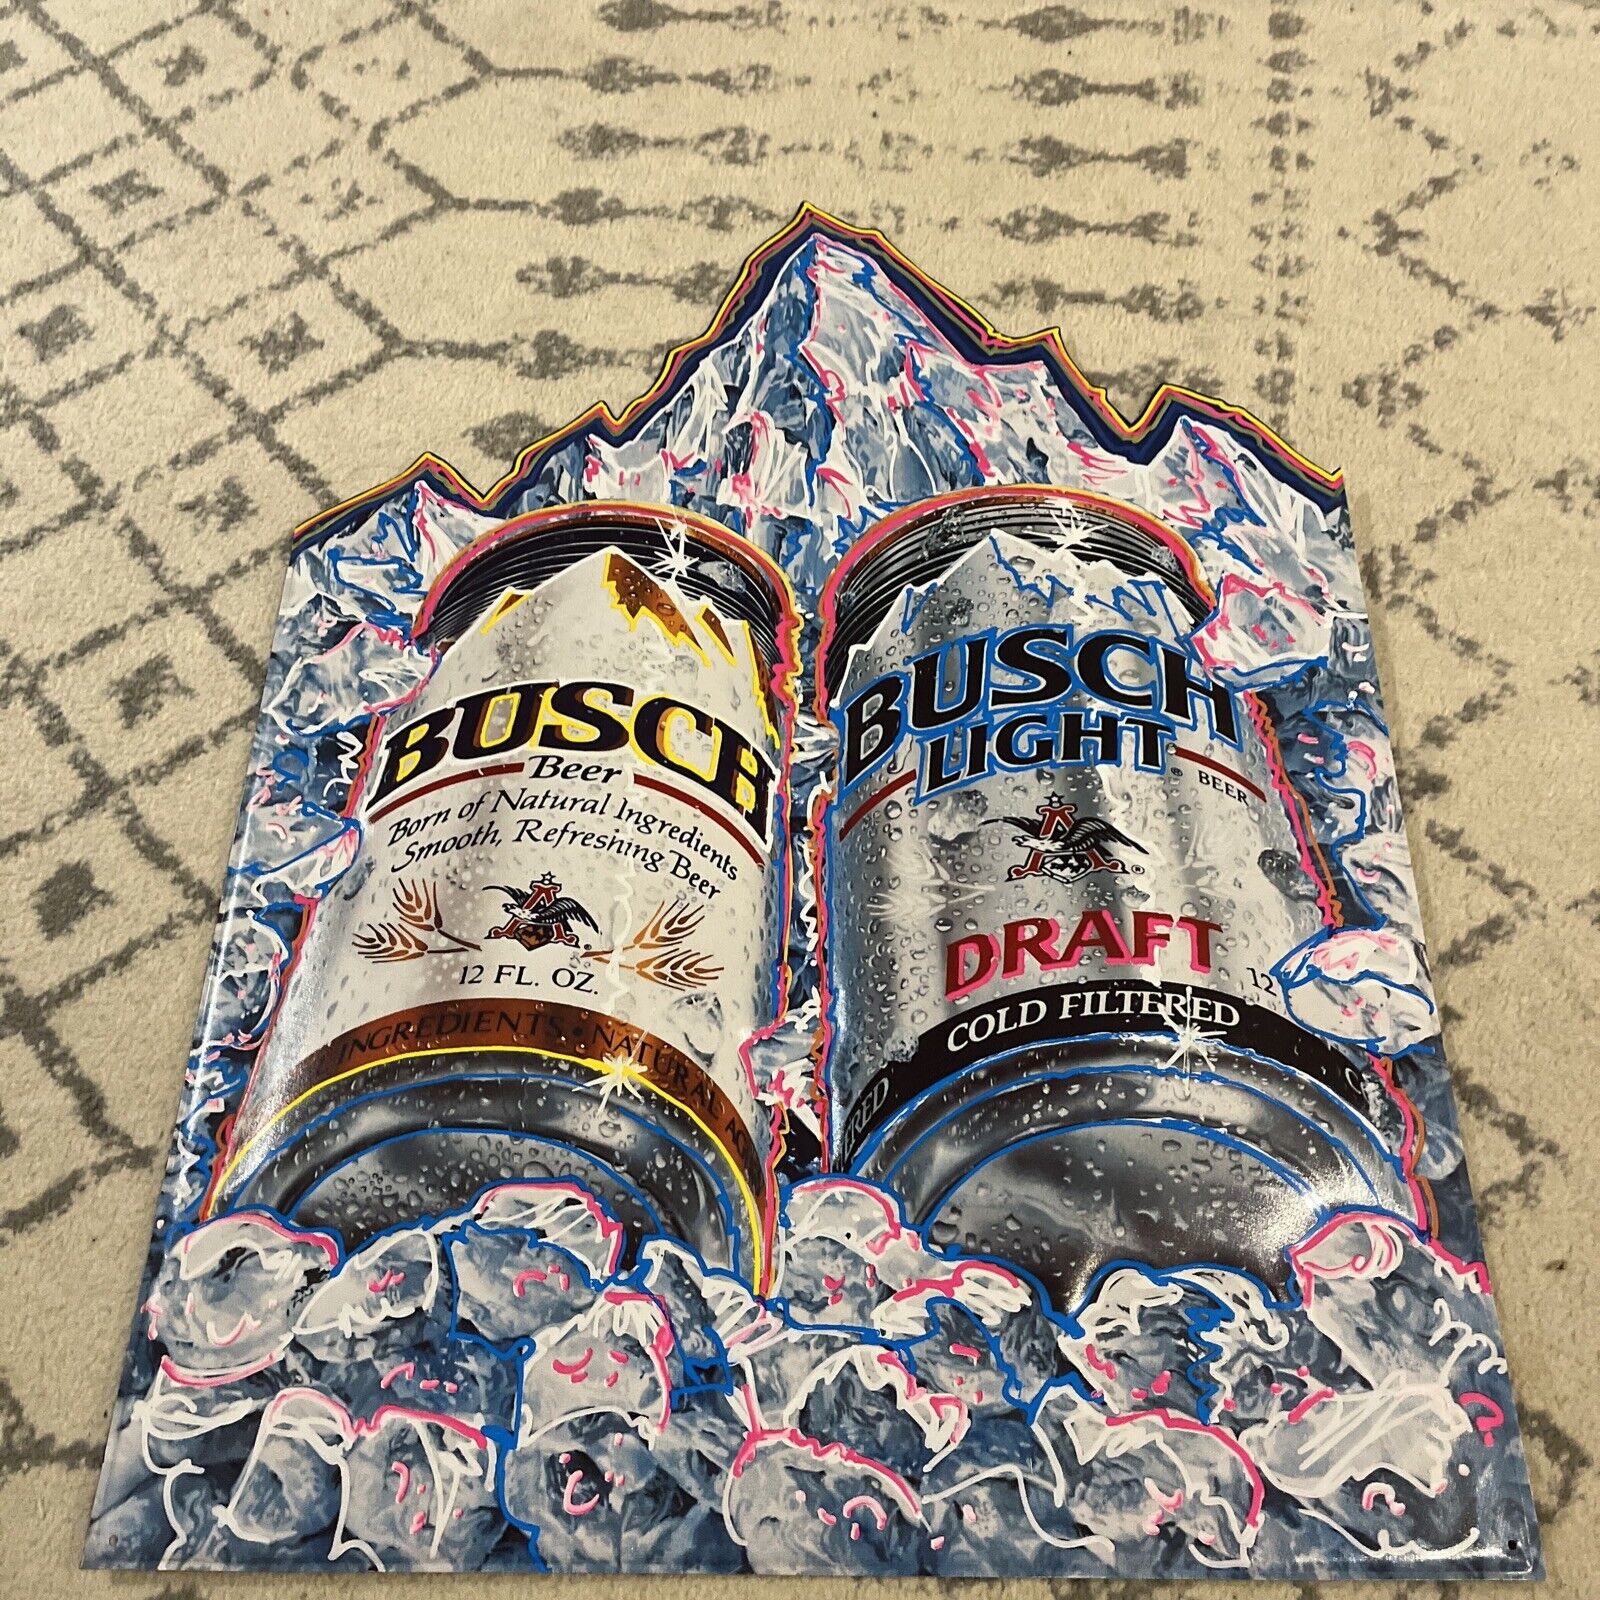 NEAR MINT VINTAGE 1991 BUSCH LIGHT BEER CAN EMBOSSED METAL TIN SIGN 29x22” RARE